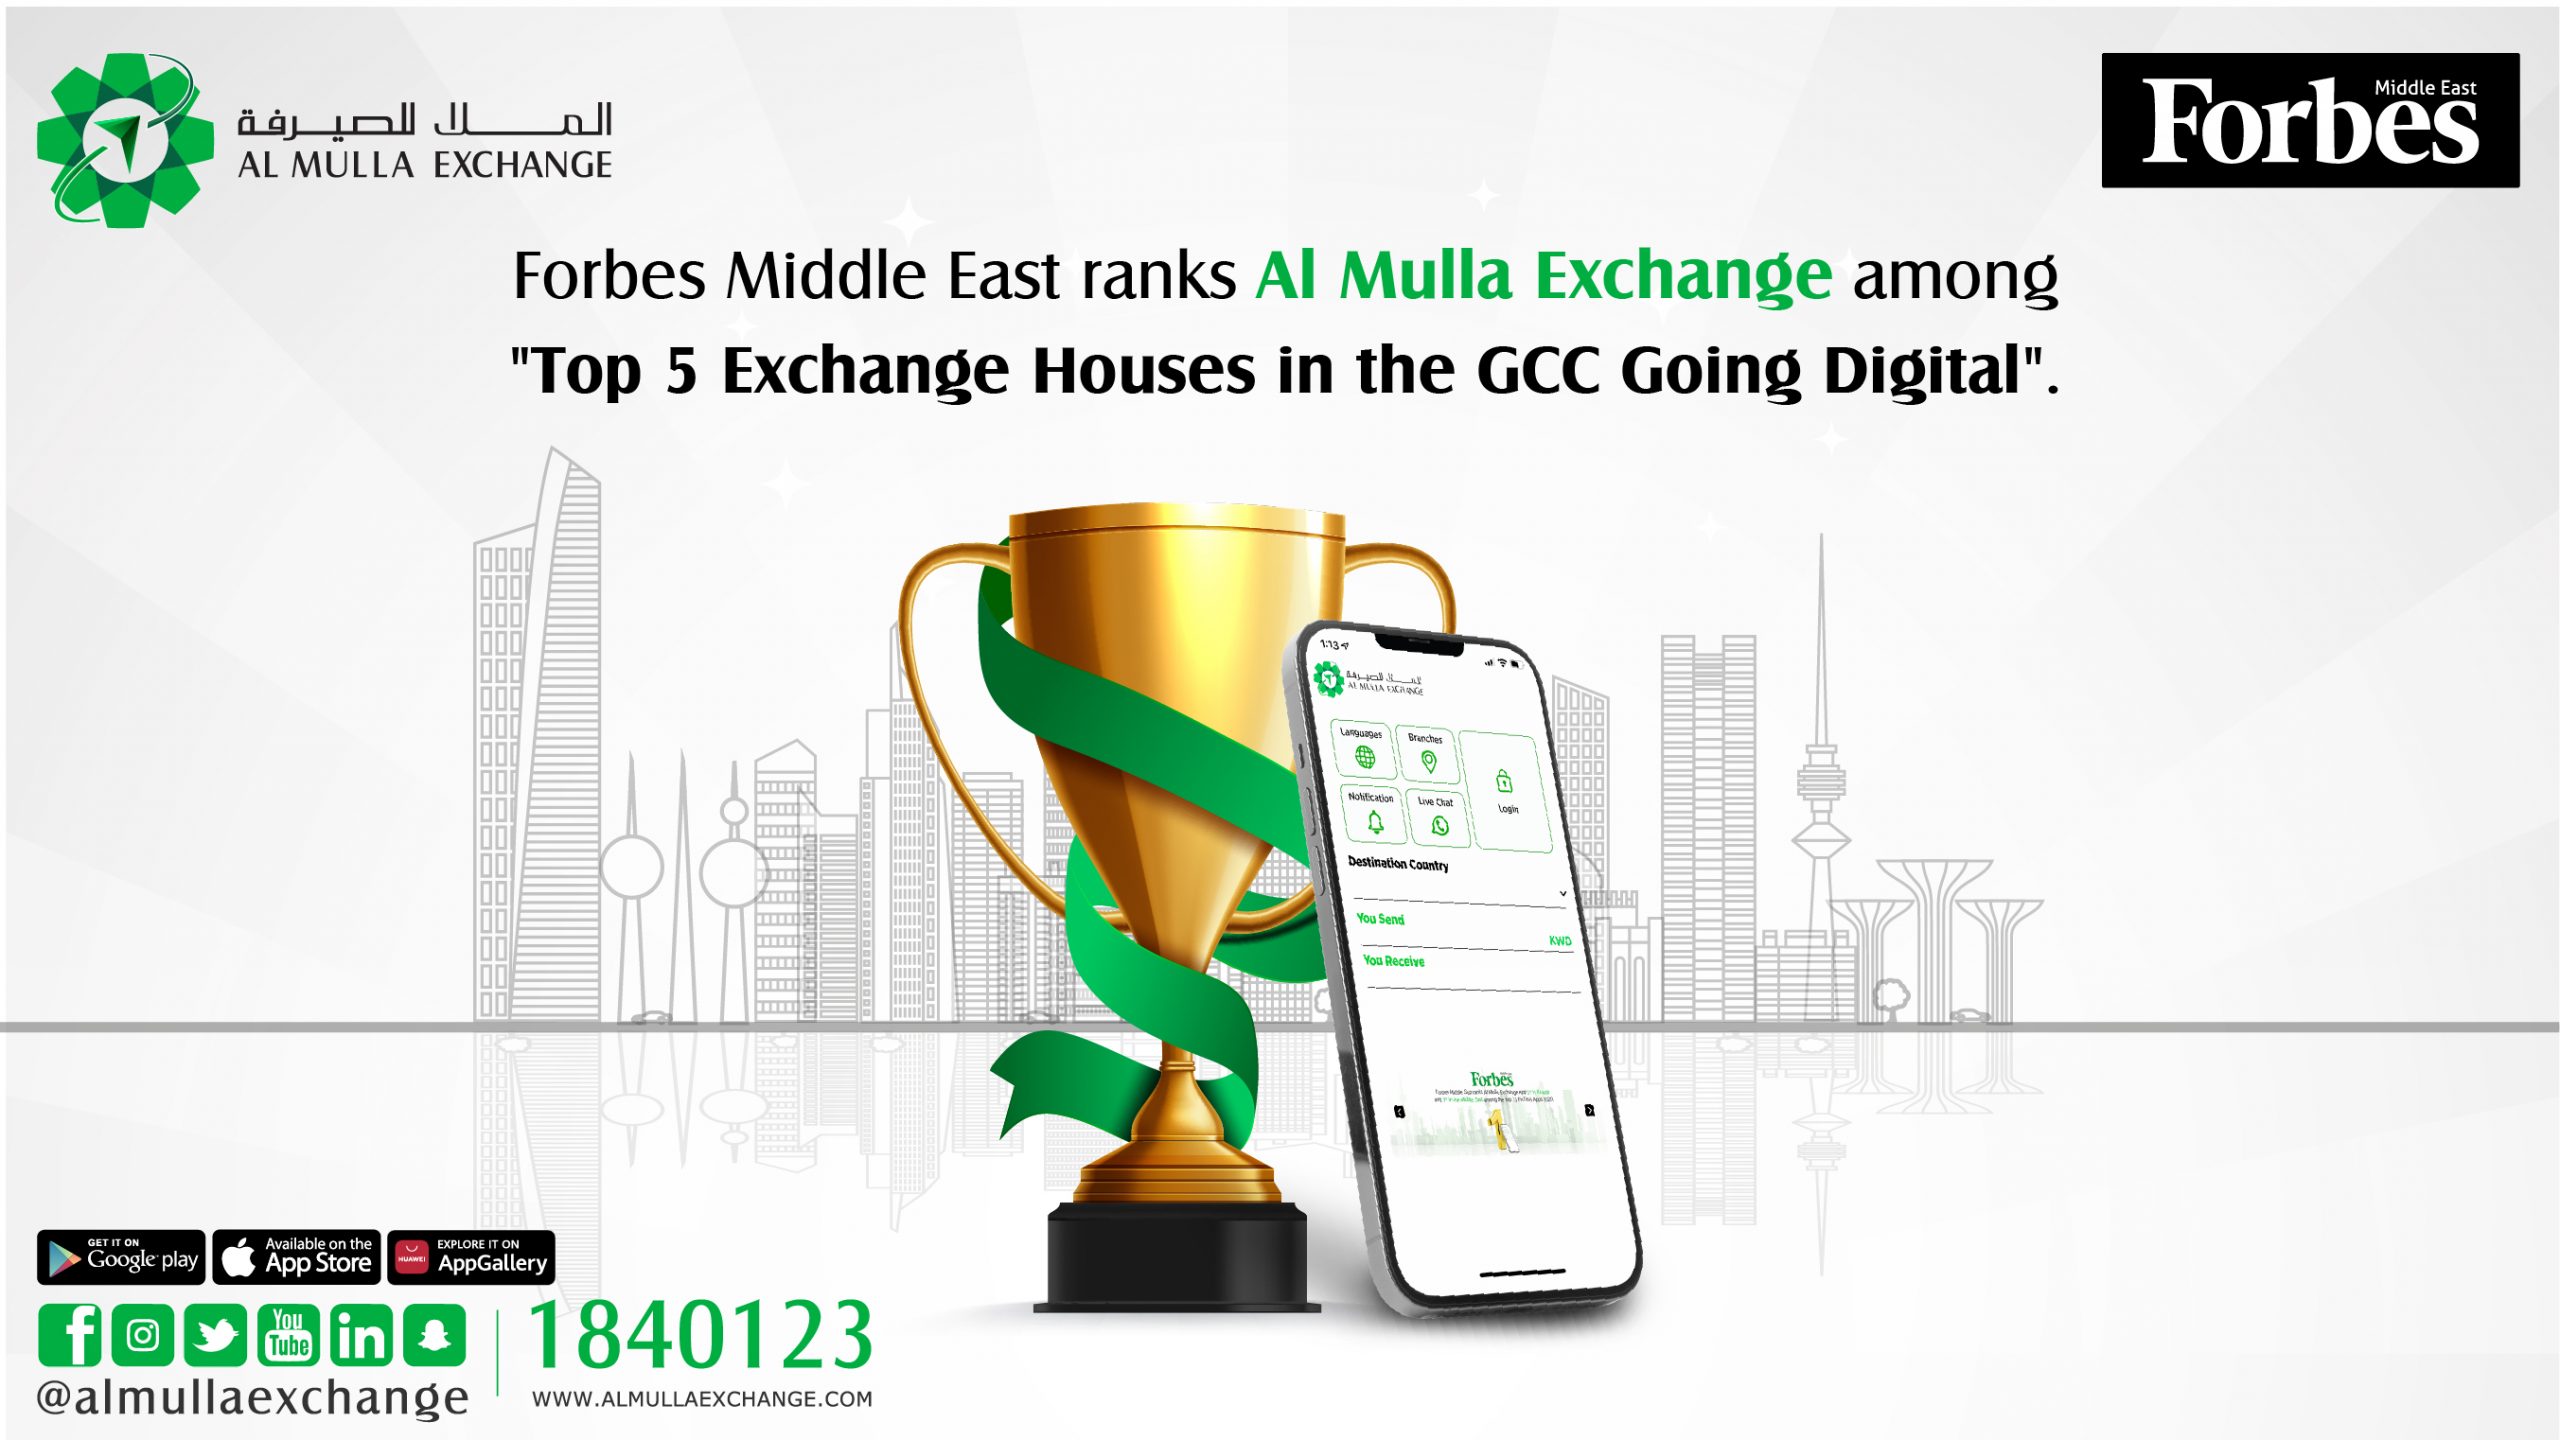 Forbes Middle East Ranks Al Mulla Exchange Among the Top 5 Exchange Houses in the GCC Going Digital